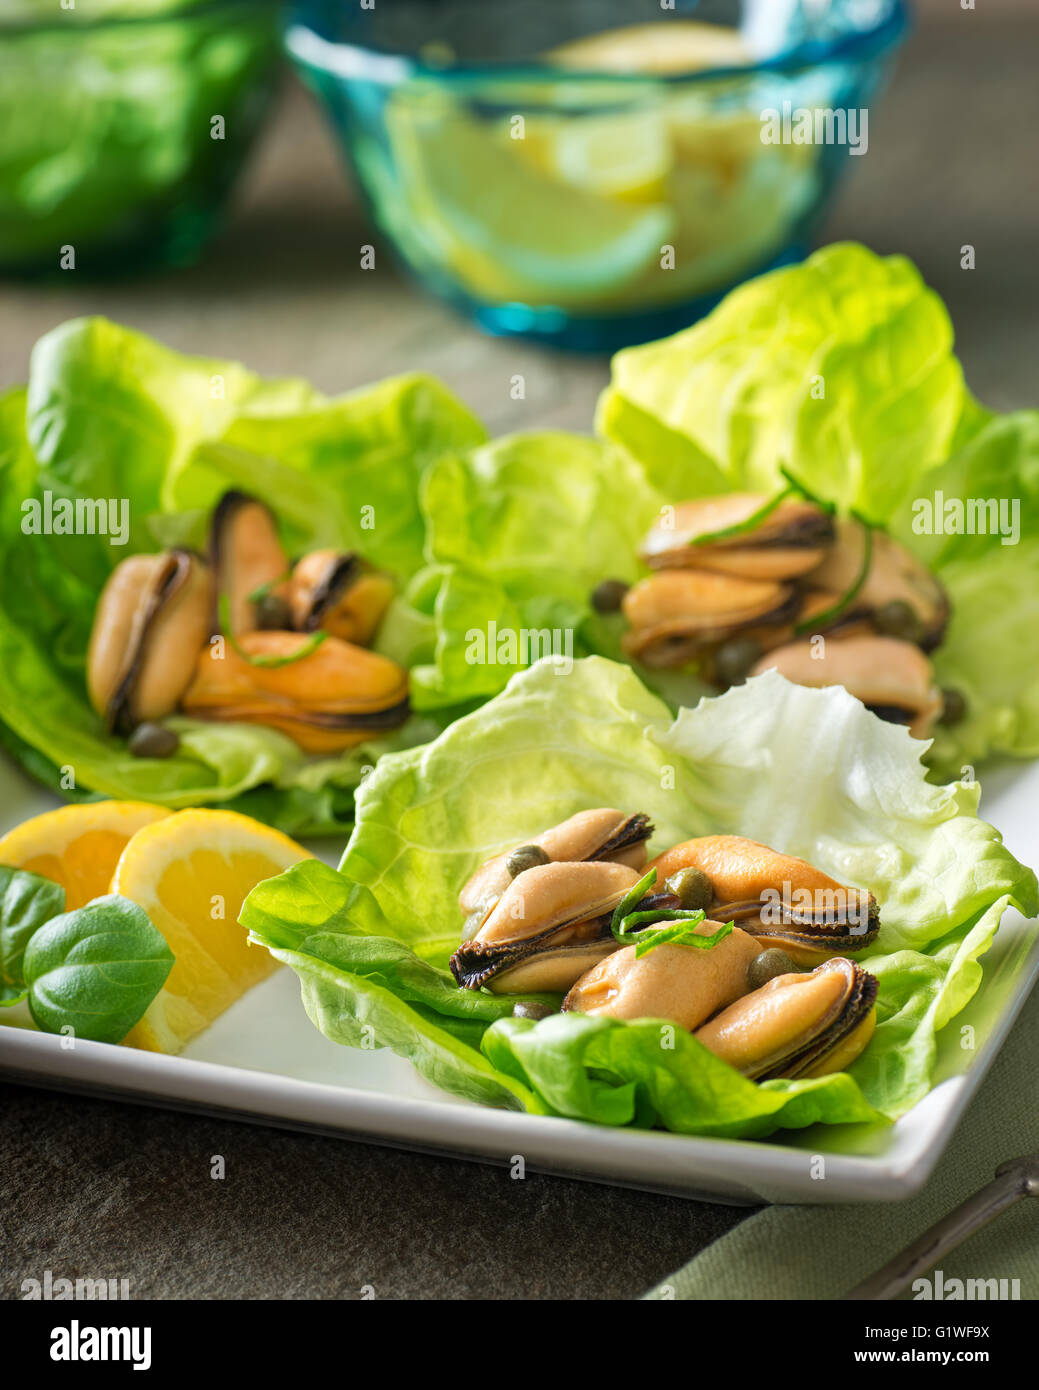 Delicious marinated mussels with capers, lemon, and basil on lettuce wraps. Stock Photo